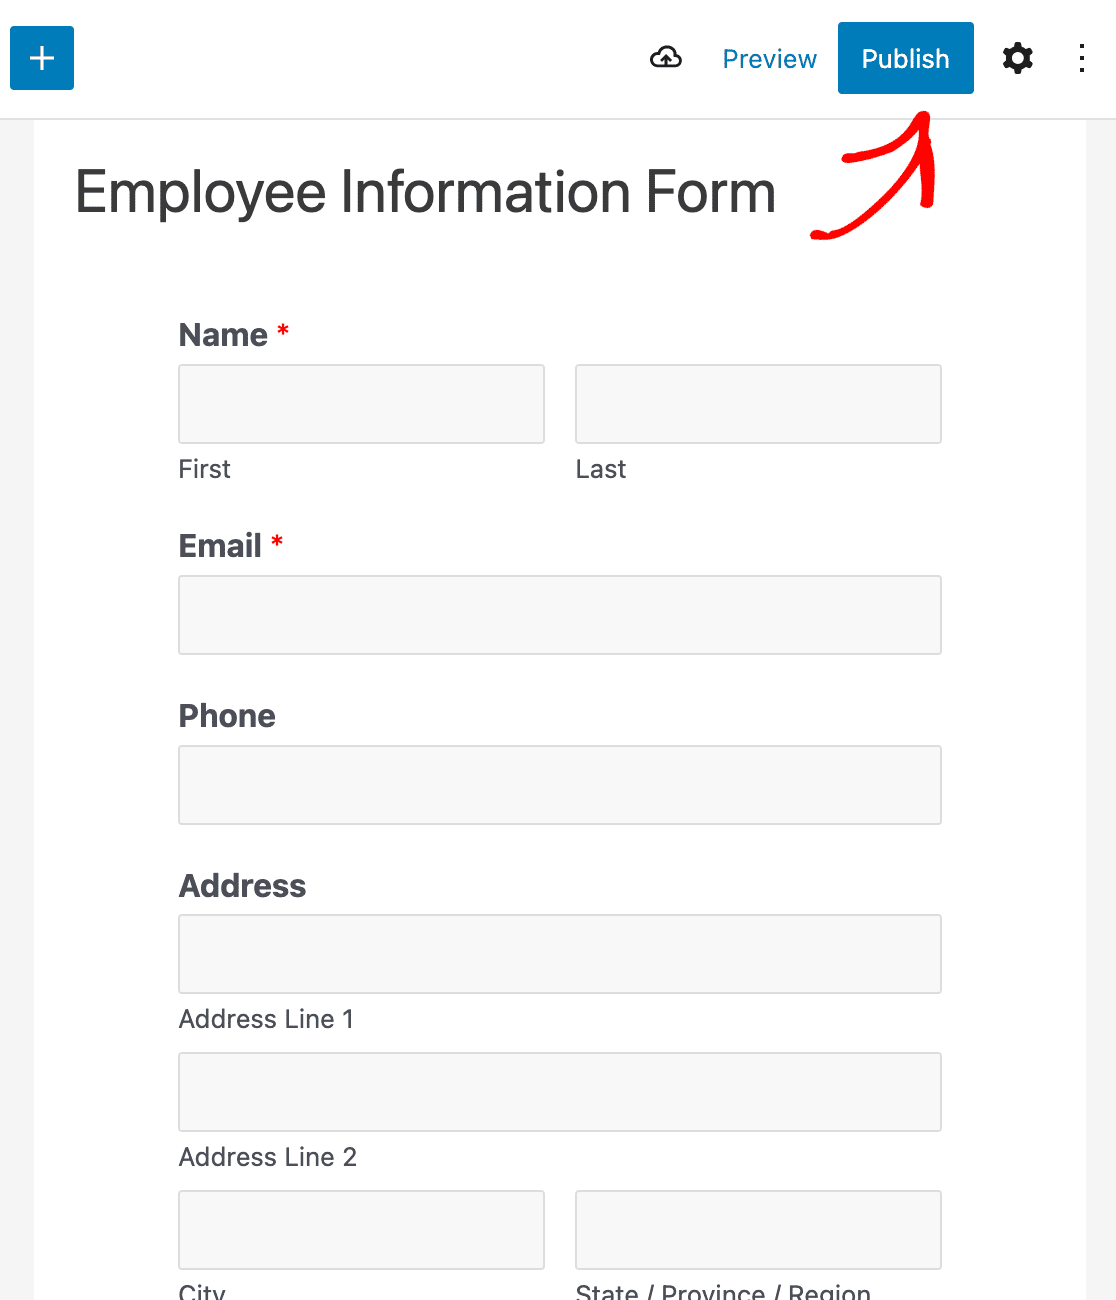 Publishing your employee information form